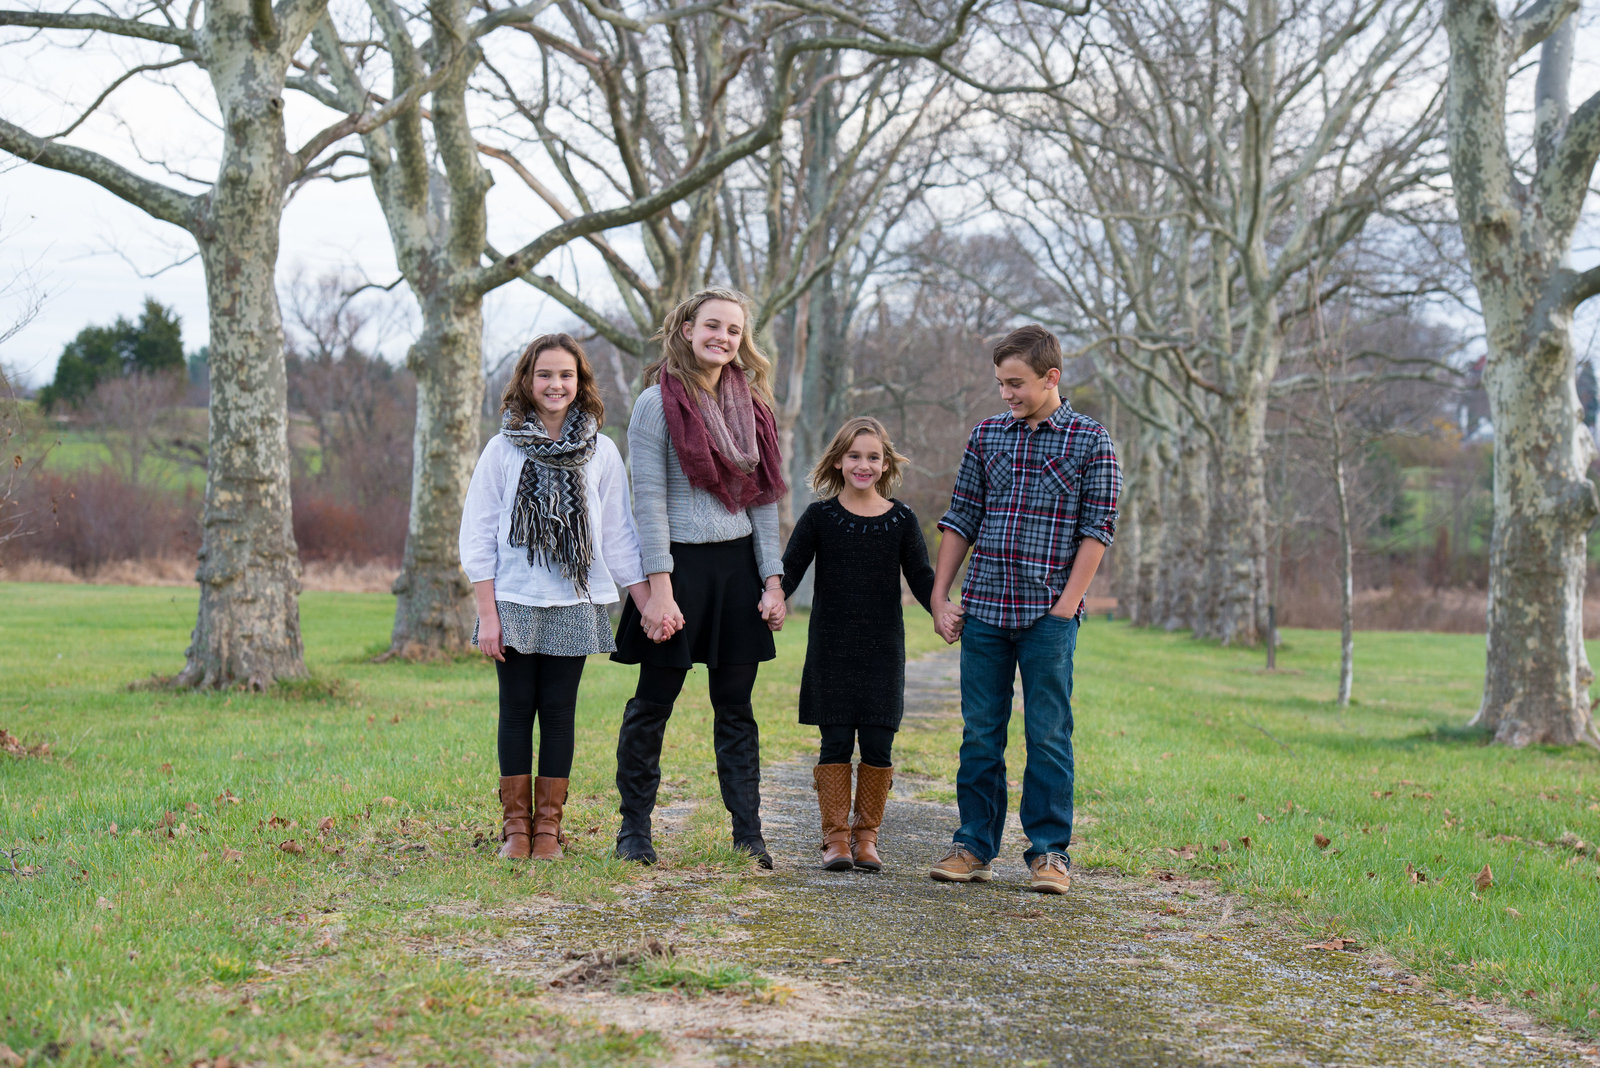 West Chester PA Photographer, Fall Family Portraits